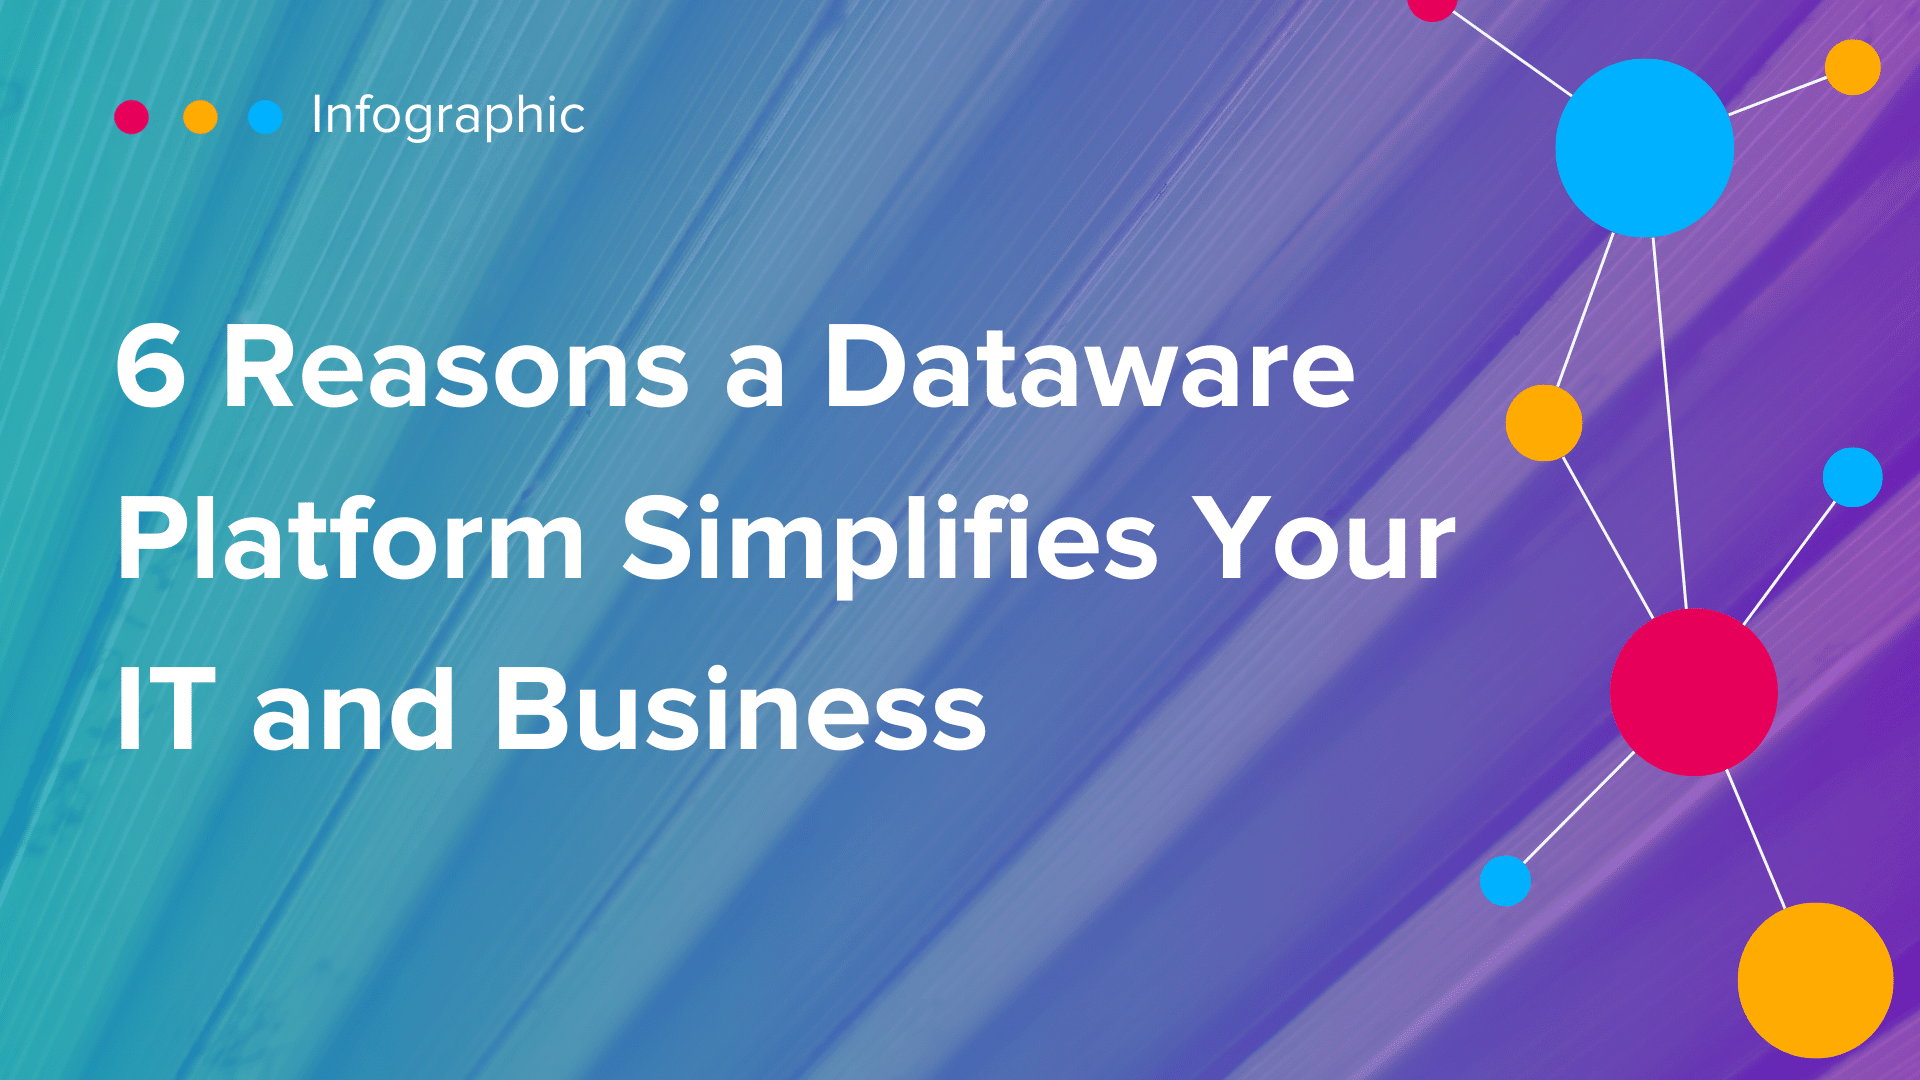 Infographic - 6 reasons dataware simplifies IT and business